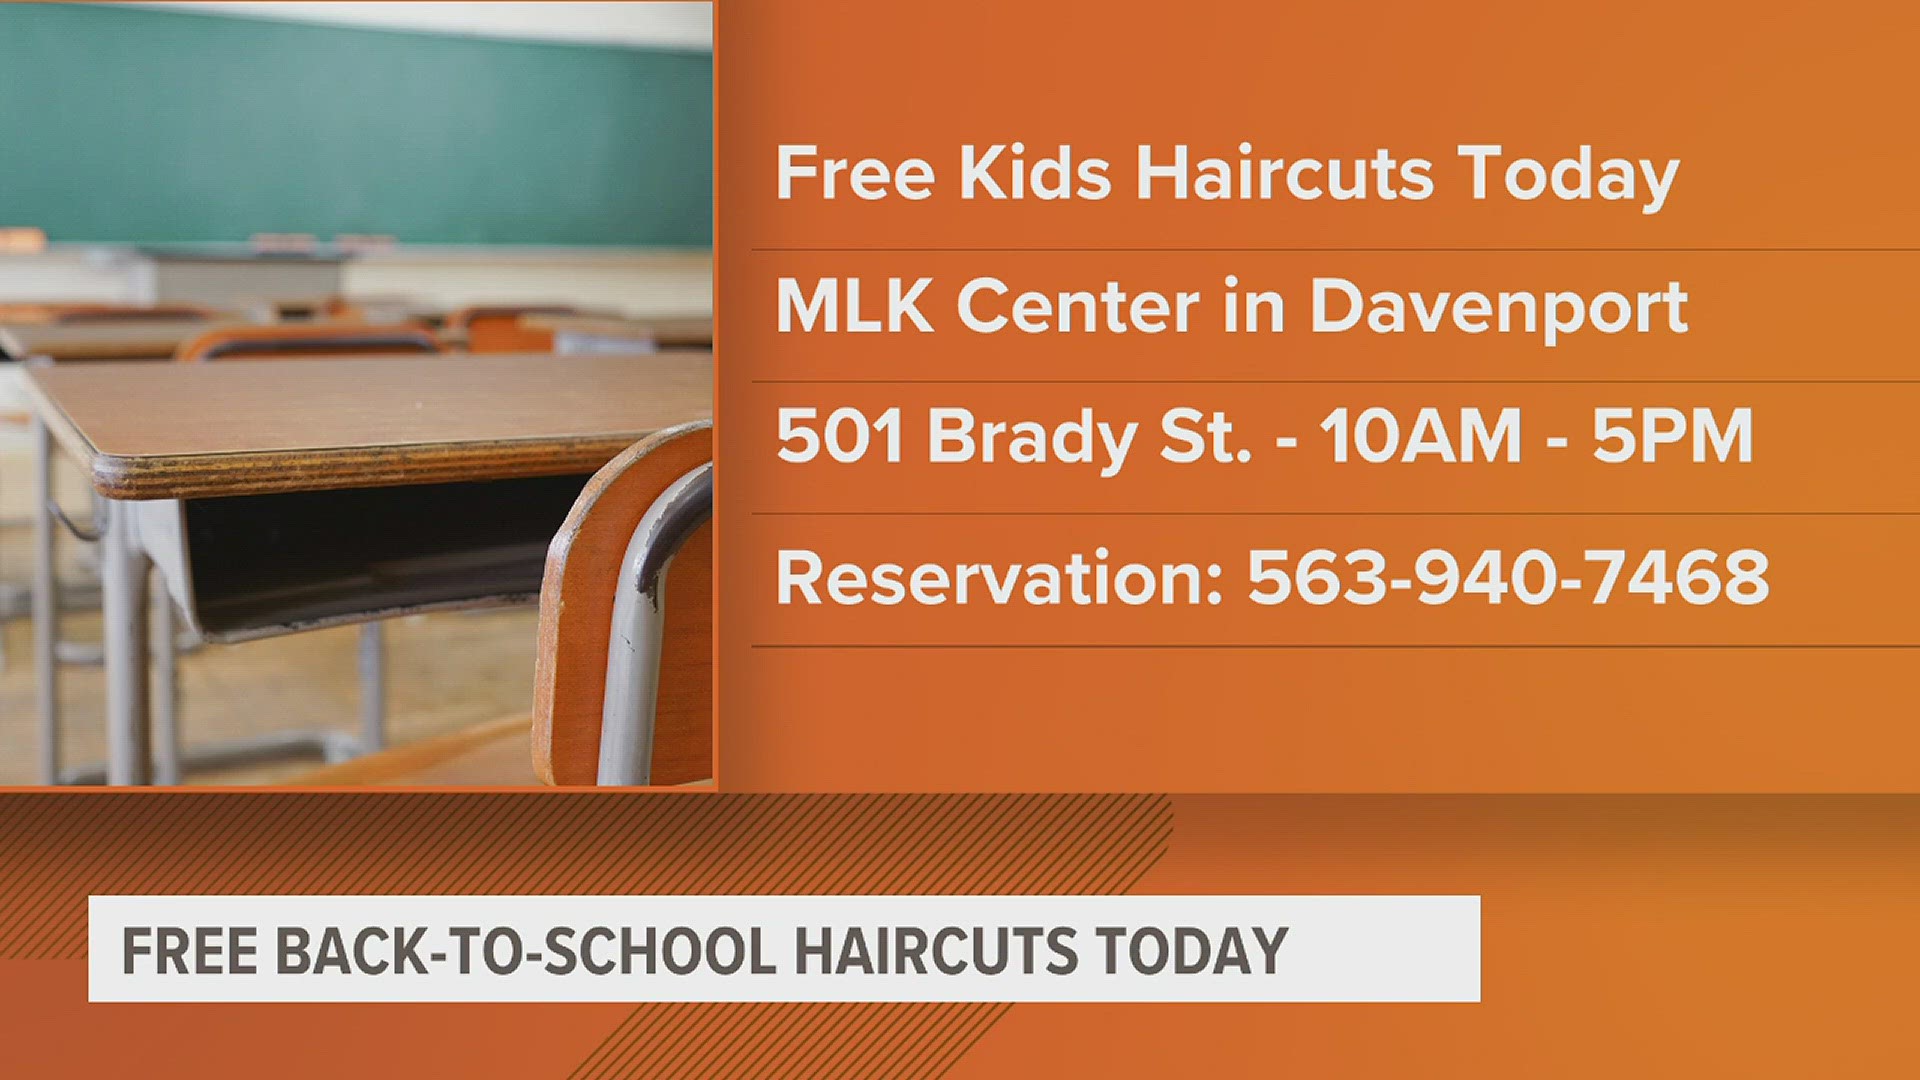 The MLK Center in Davenport is offering free haircuts for students, although reservations are required.